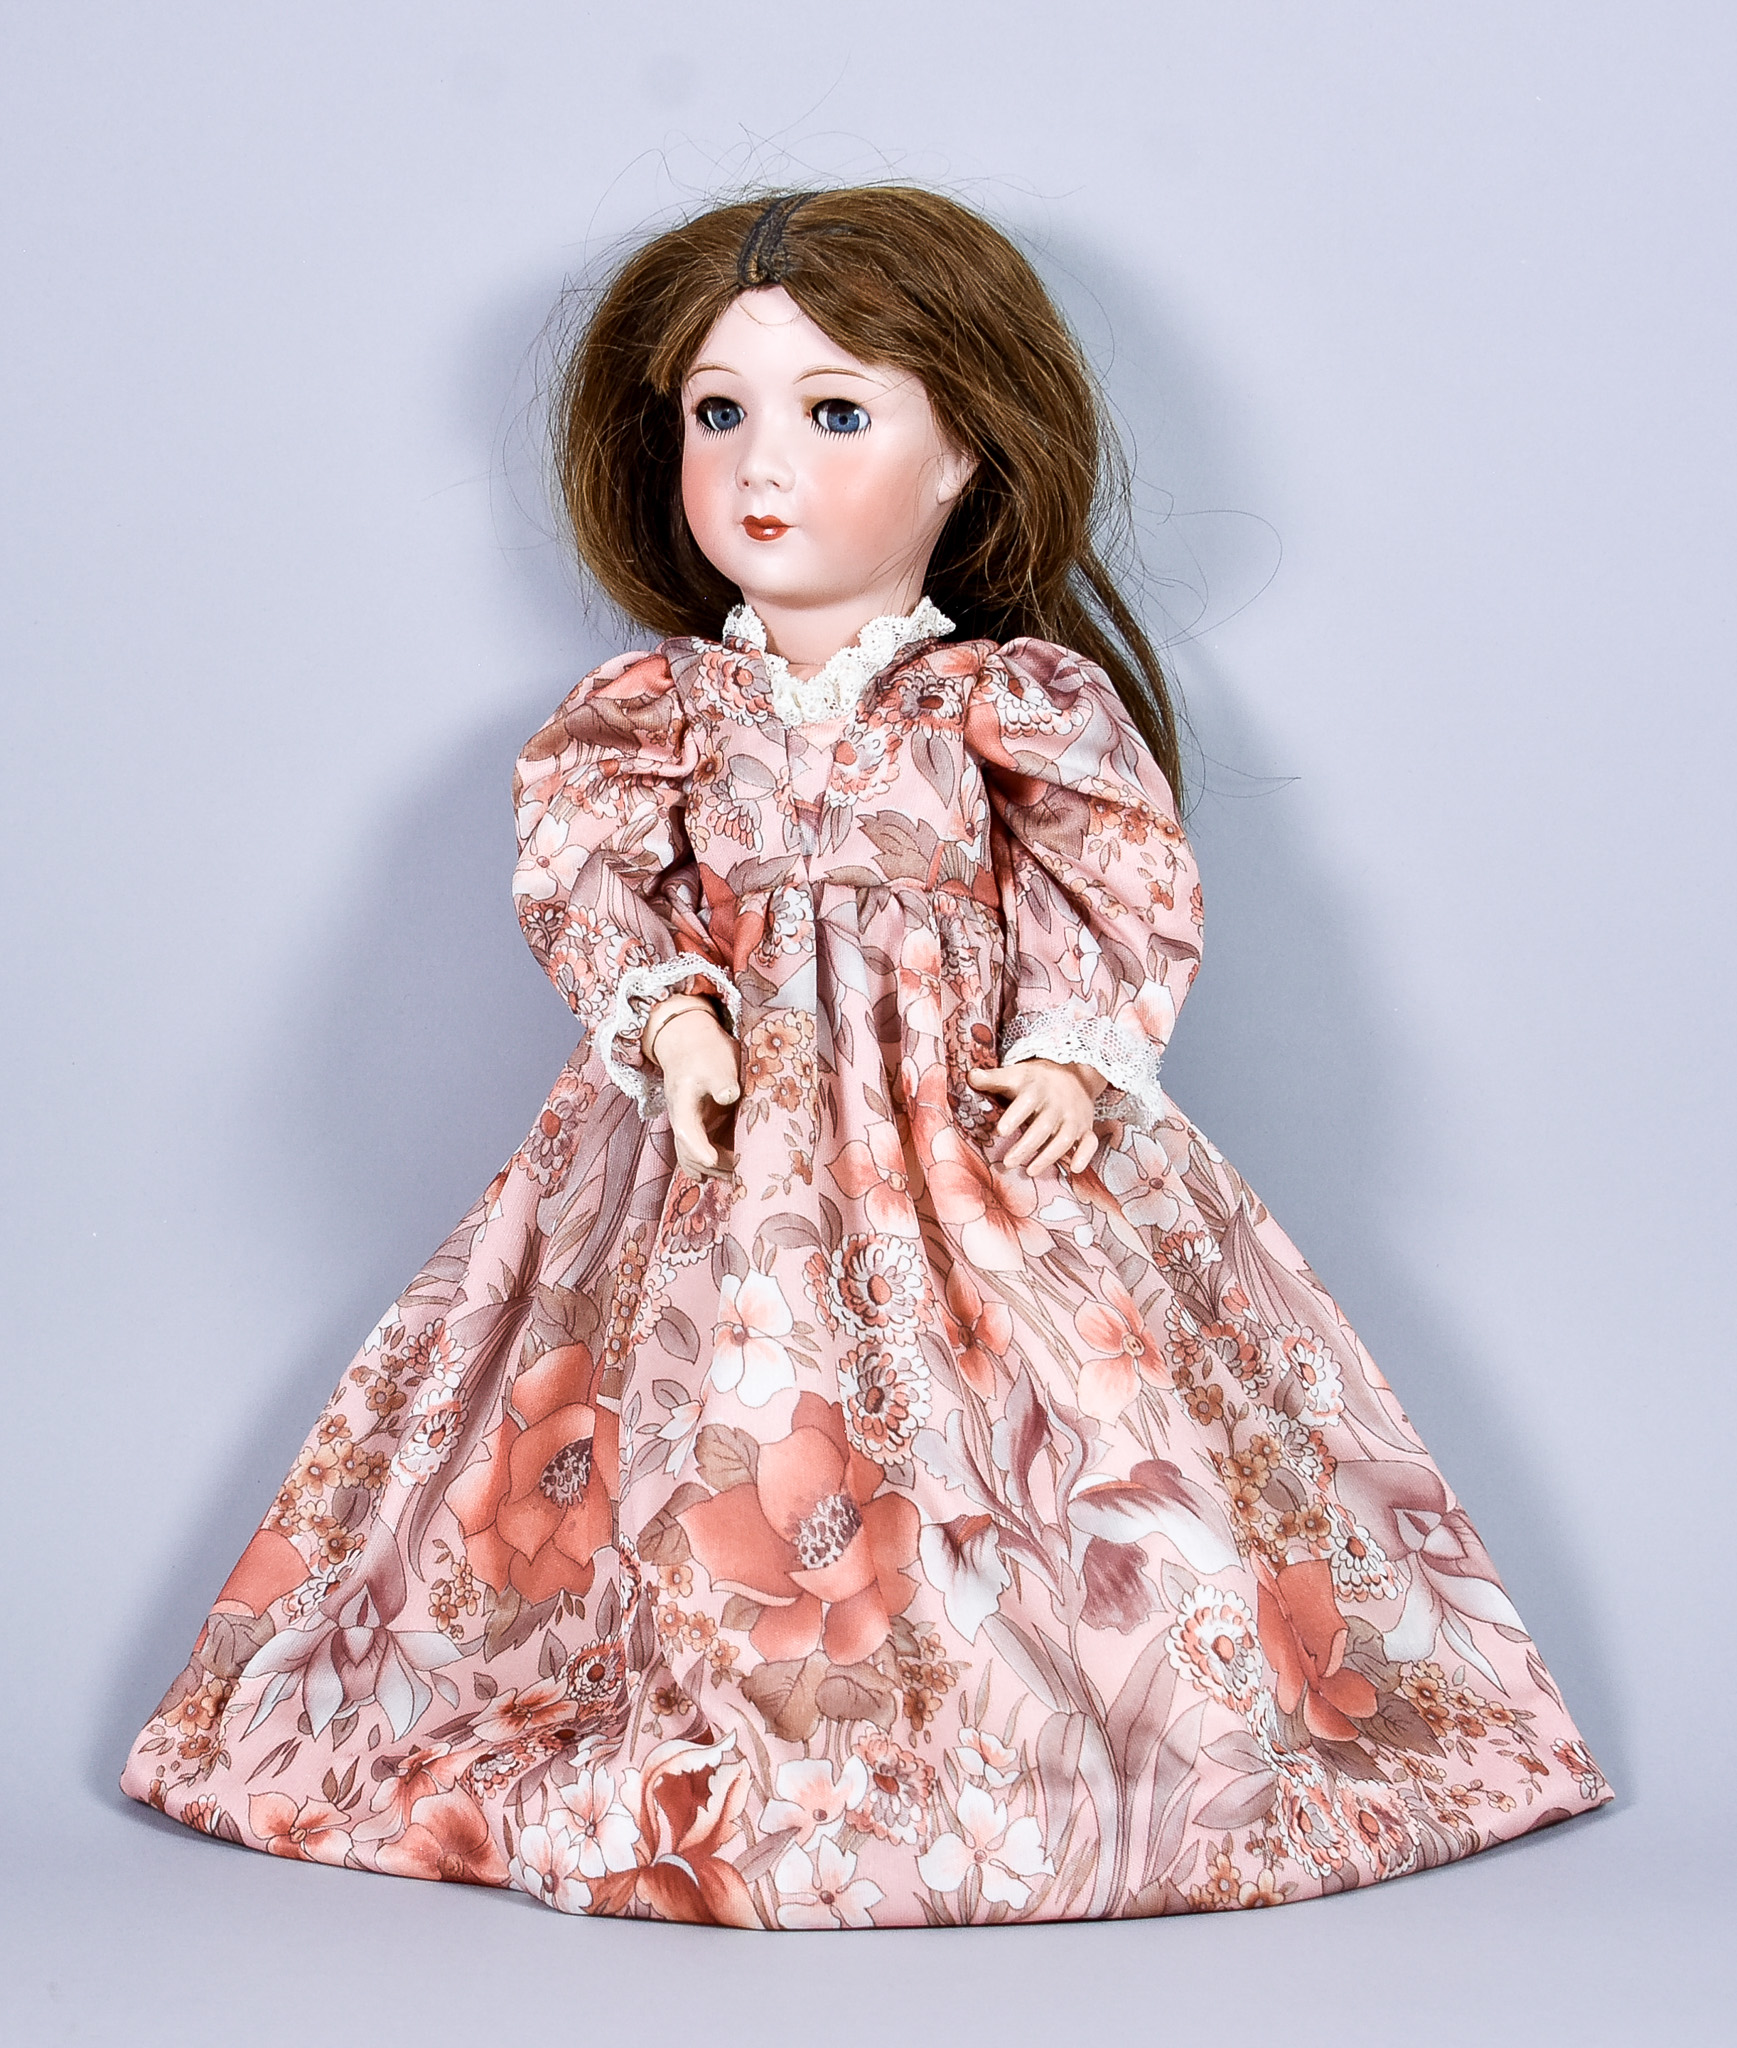 A Jumeau Bisque Headed "Princess" Doll, 1938, with closing glass eyes, the back of the head